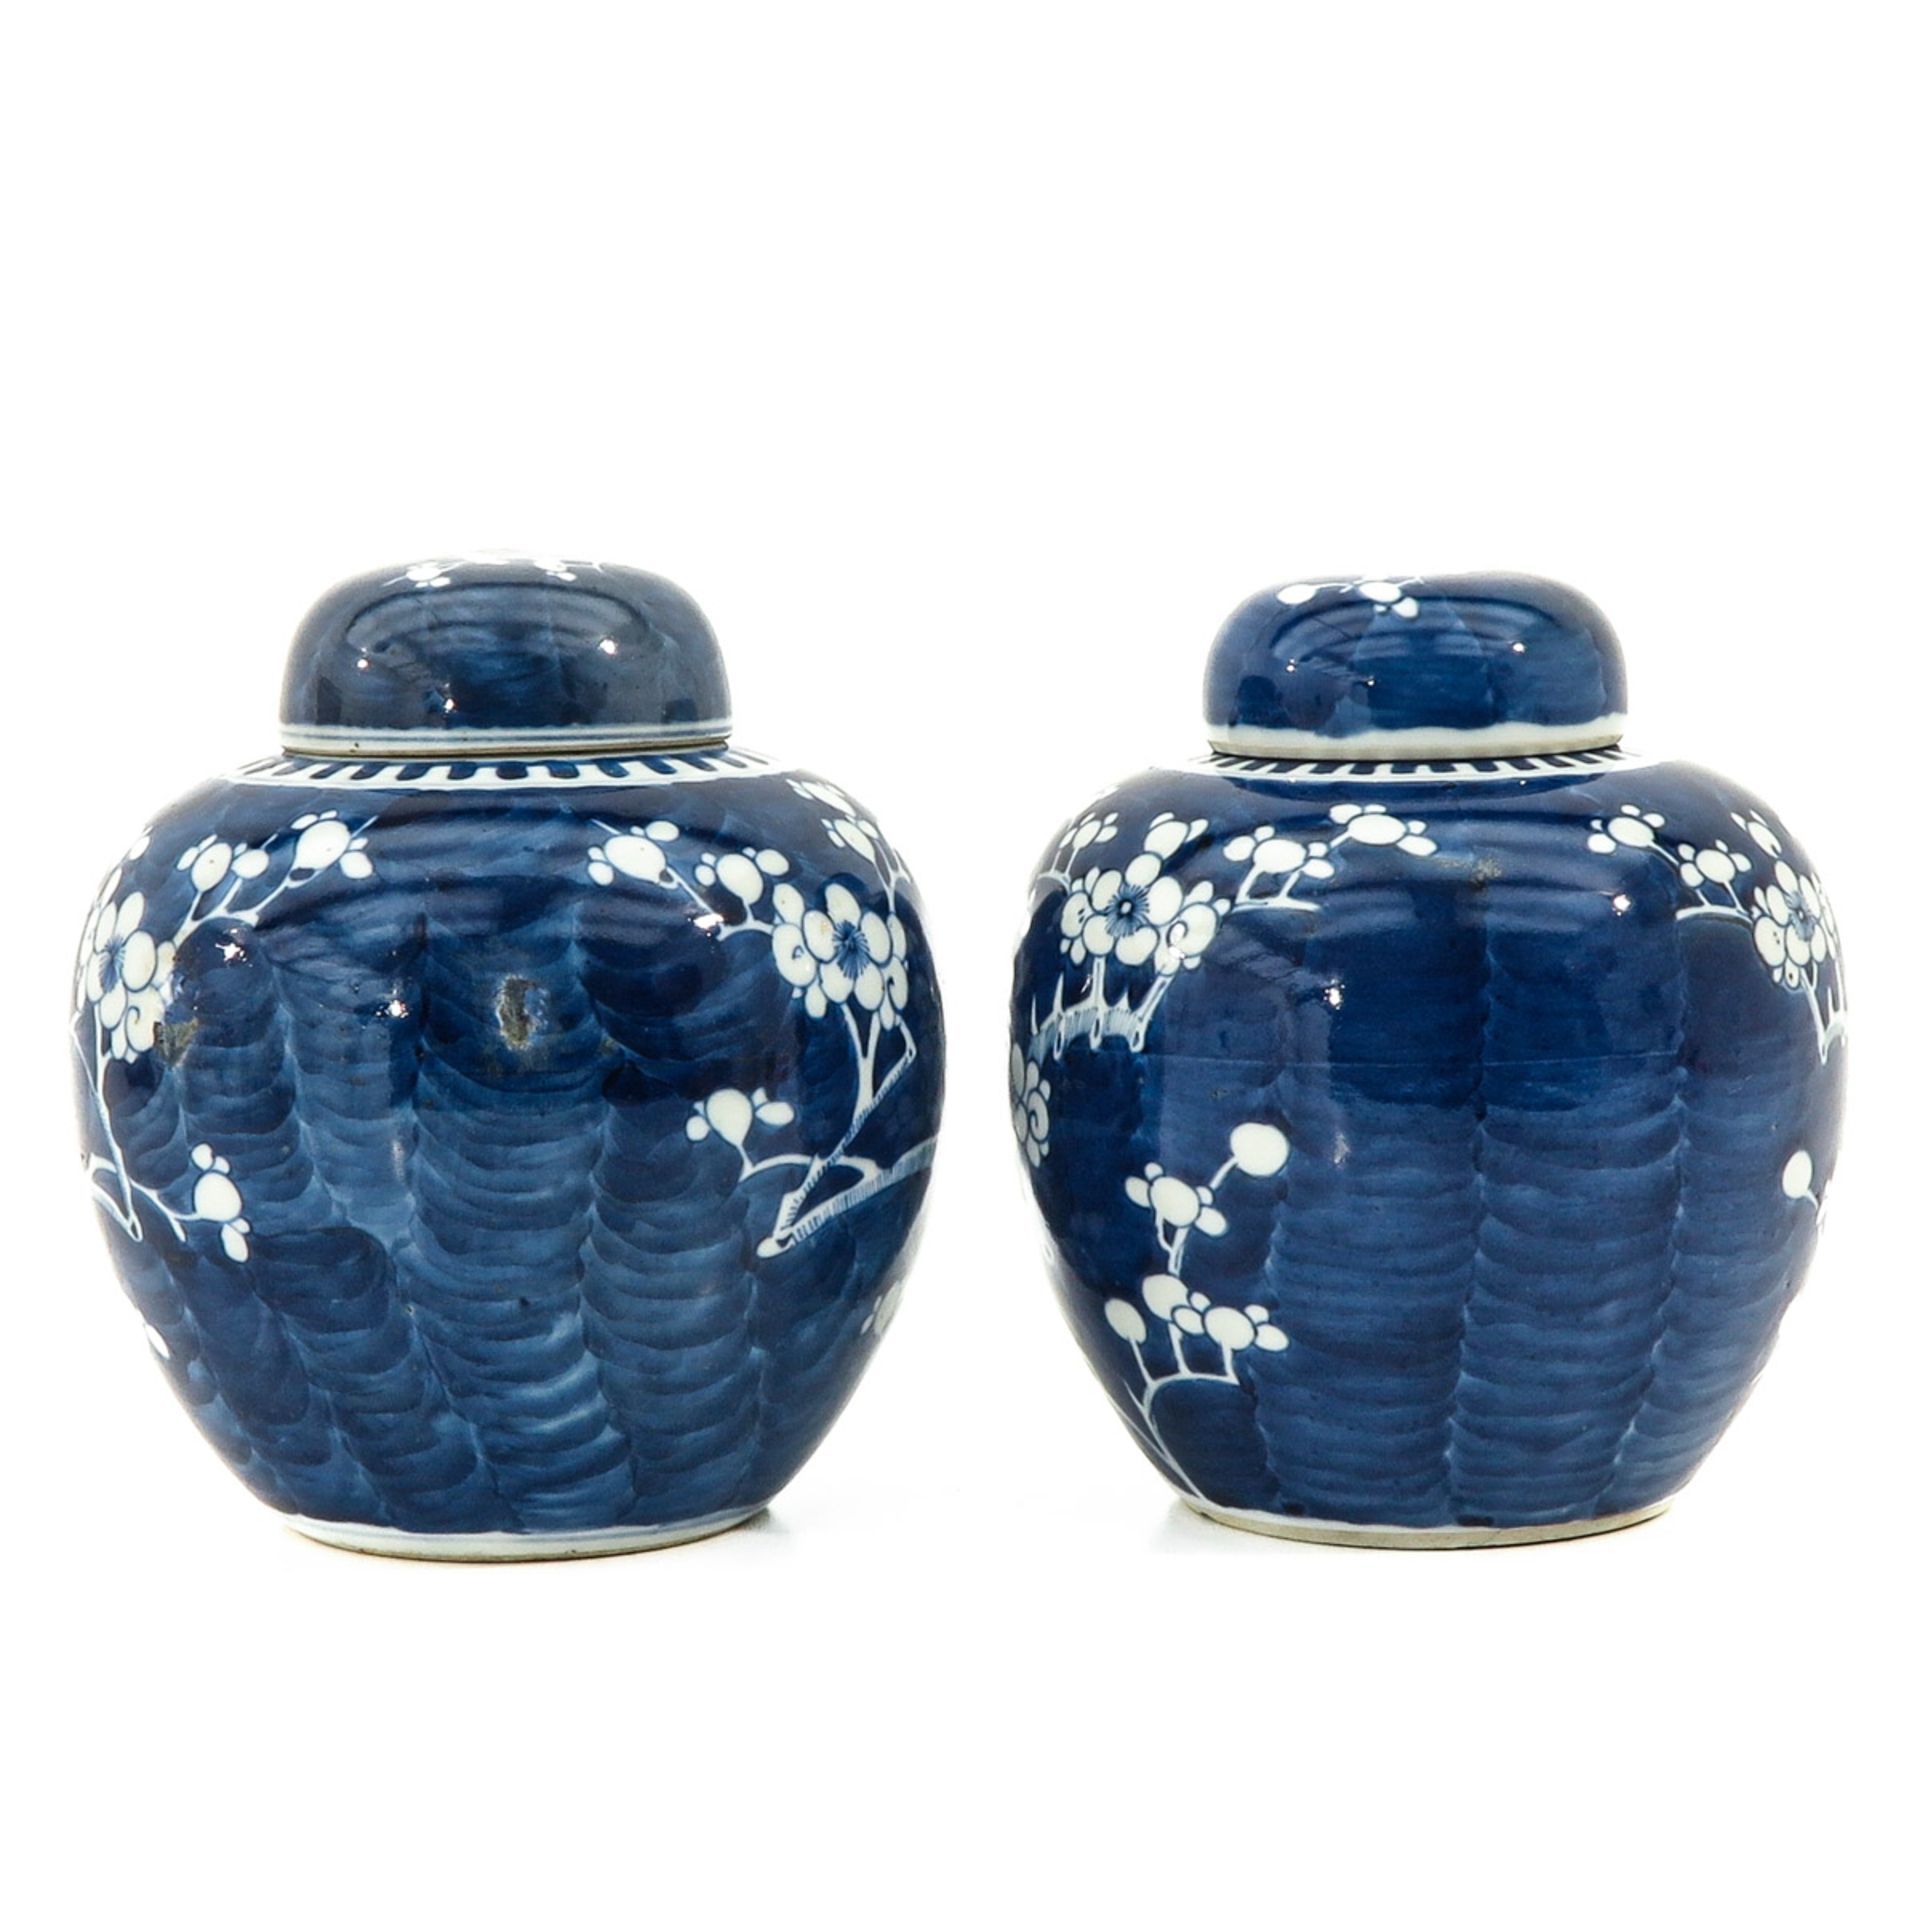 A Pair of Ginger Jars - Image 4 of 9